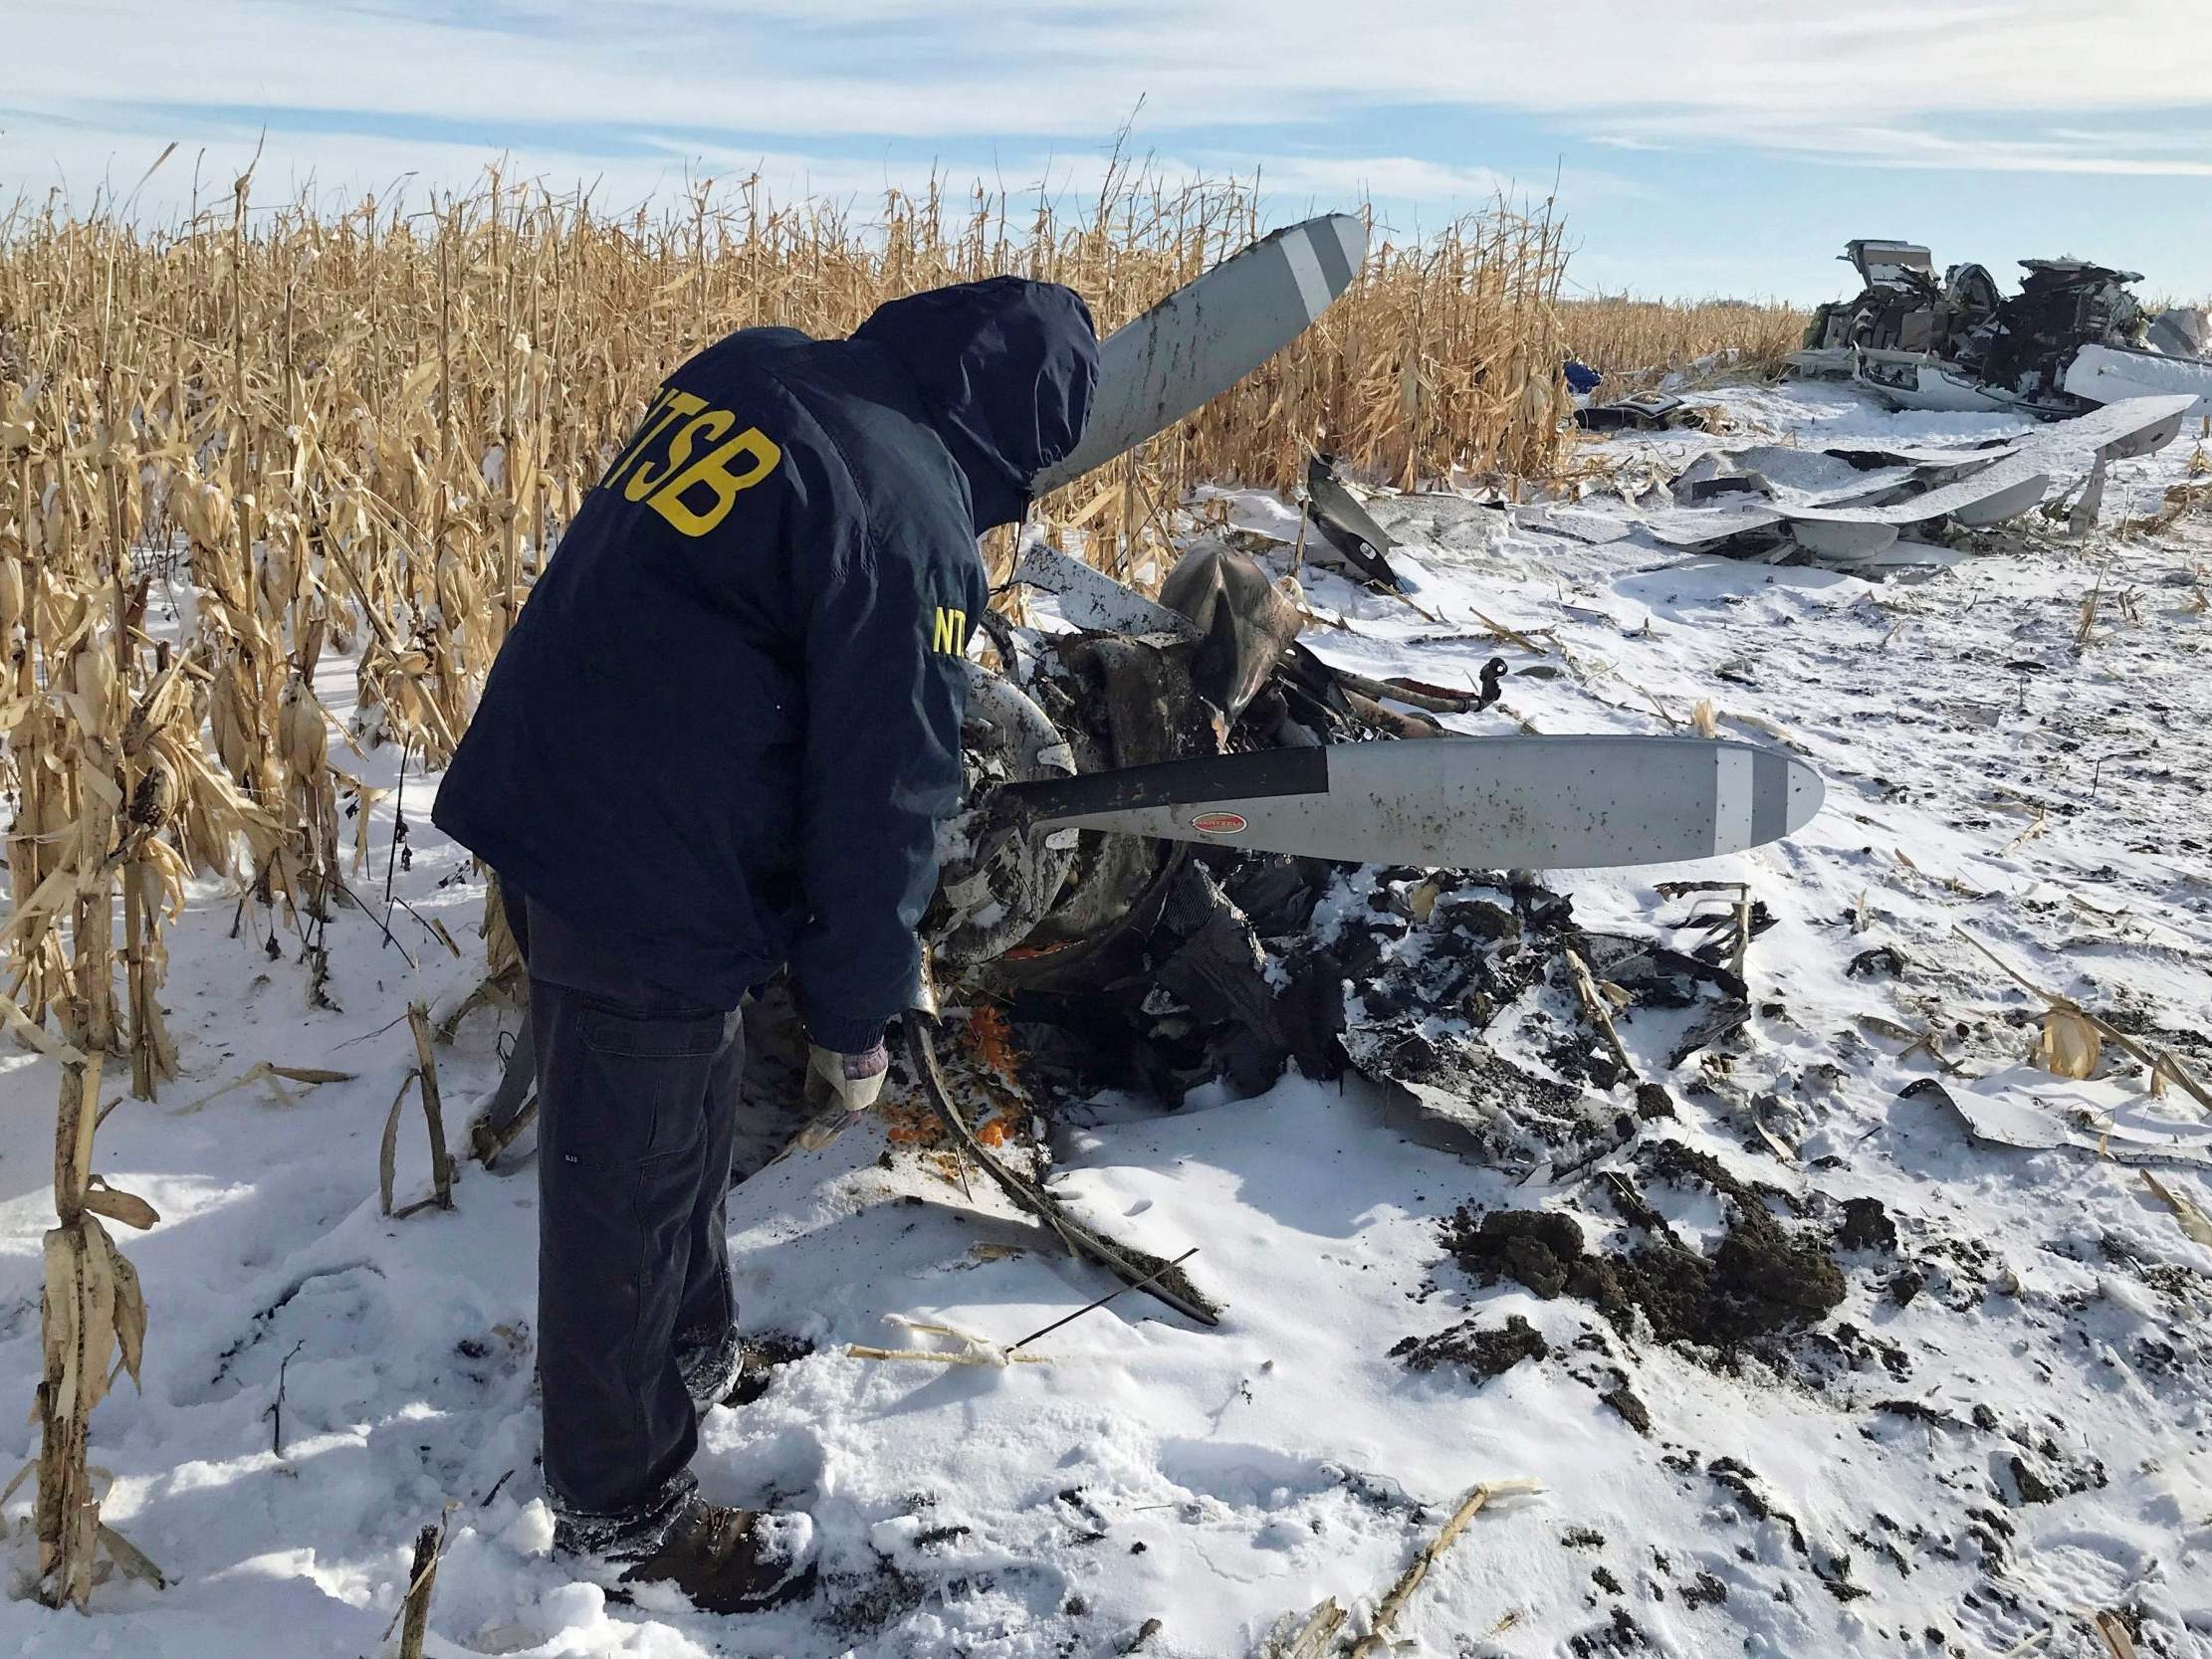 An NTSB air safety investigator begins the initial examination of the wreckage of the Pilatus PC-12 that crashed in Chamberlain, South Dakota